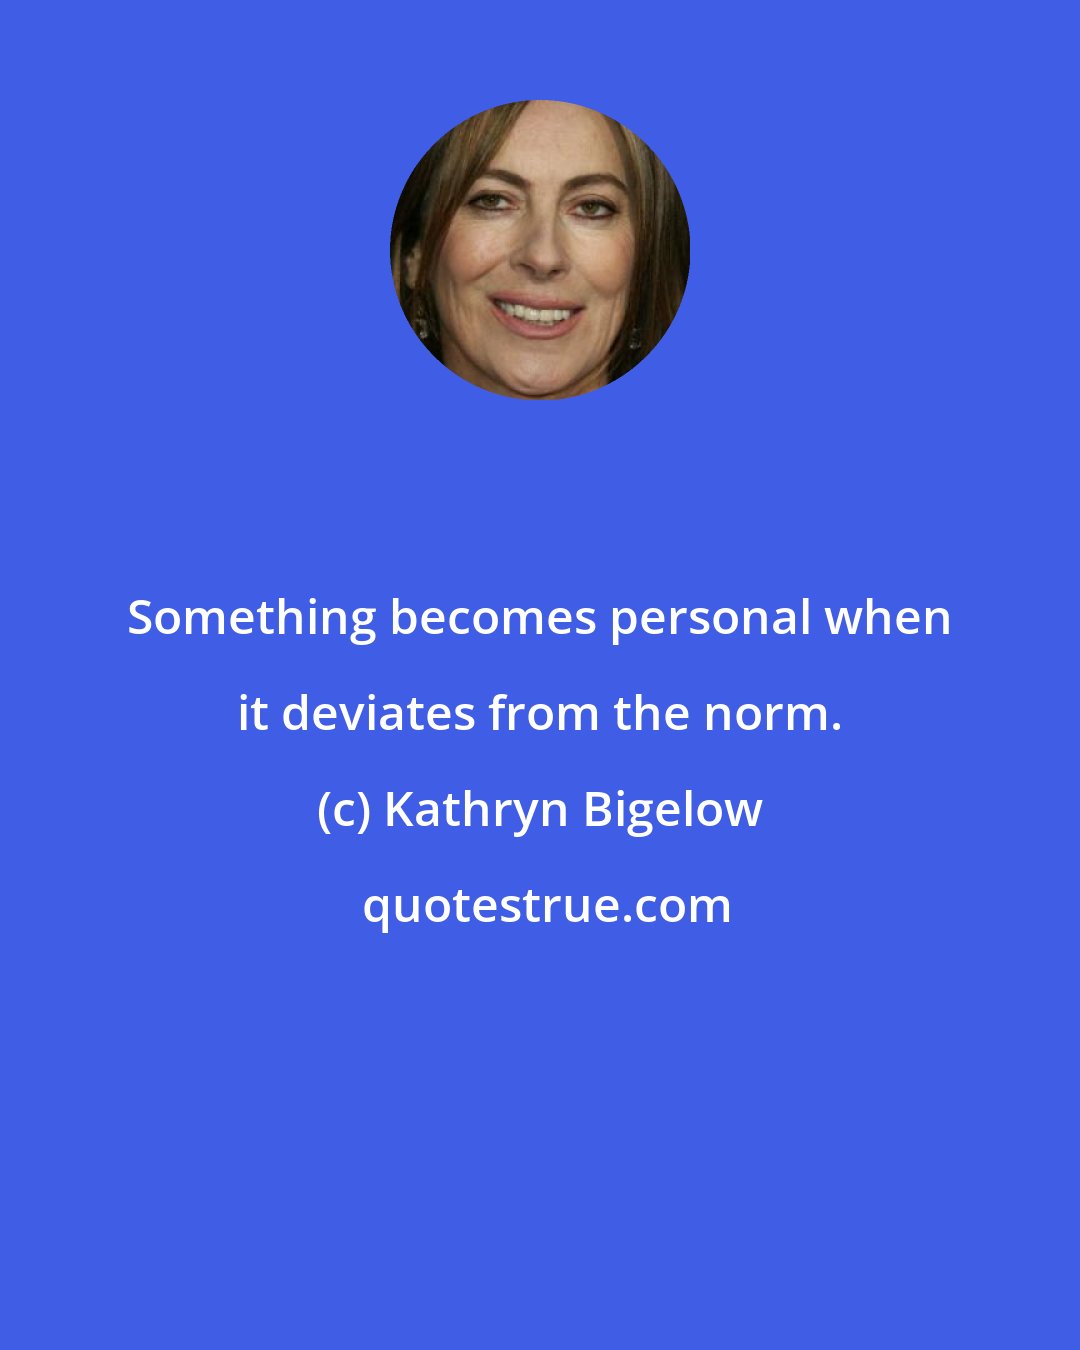 Kathryn Bigelow: Something becomes personal when it deviates from the norm.